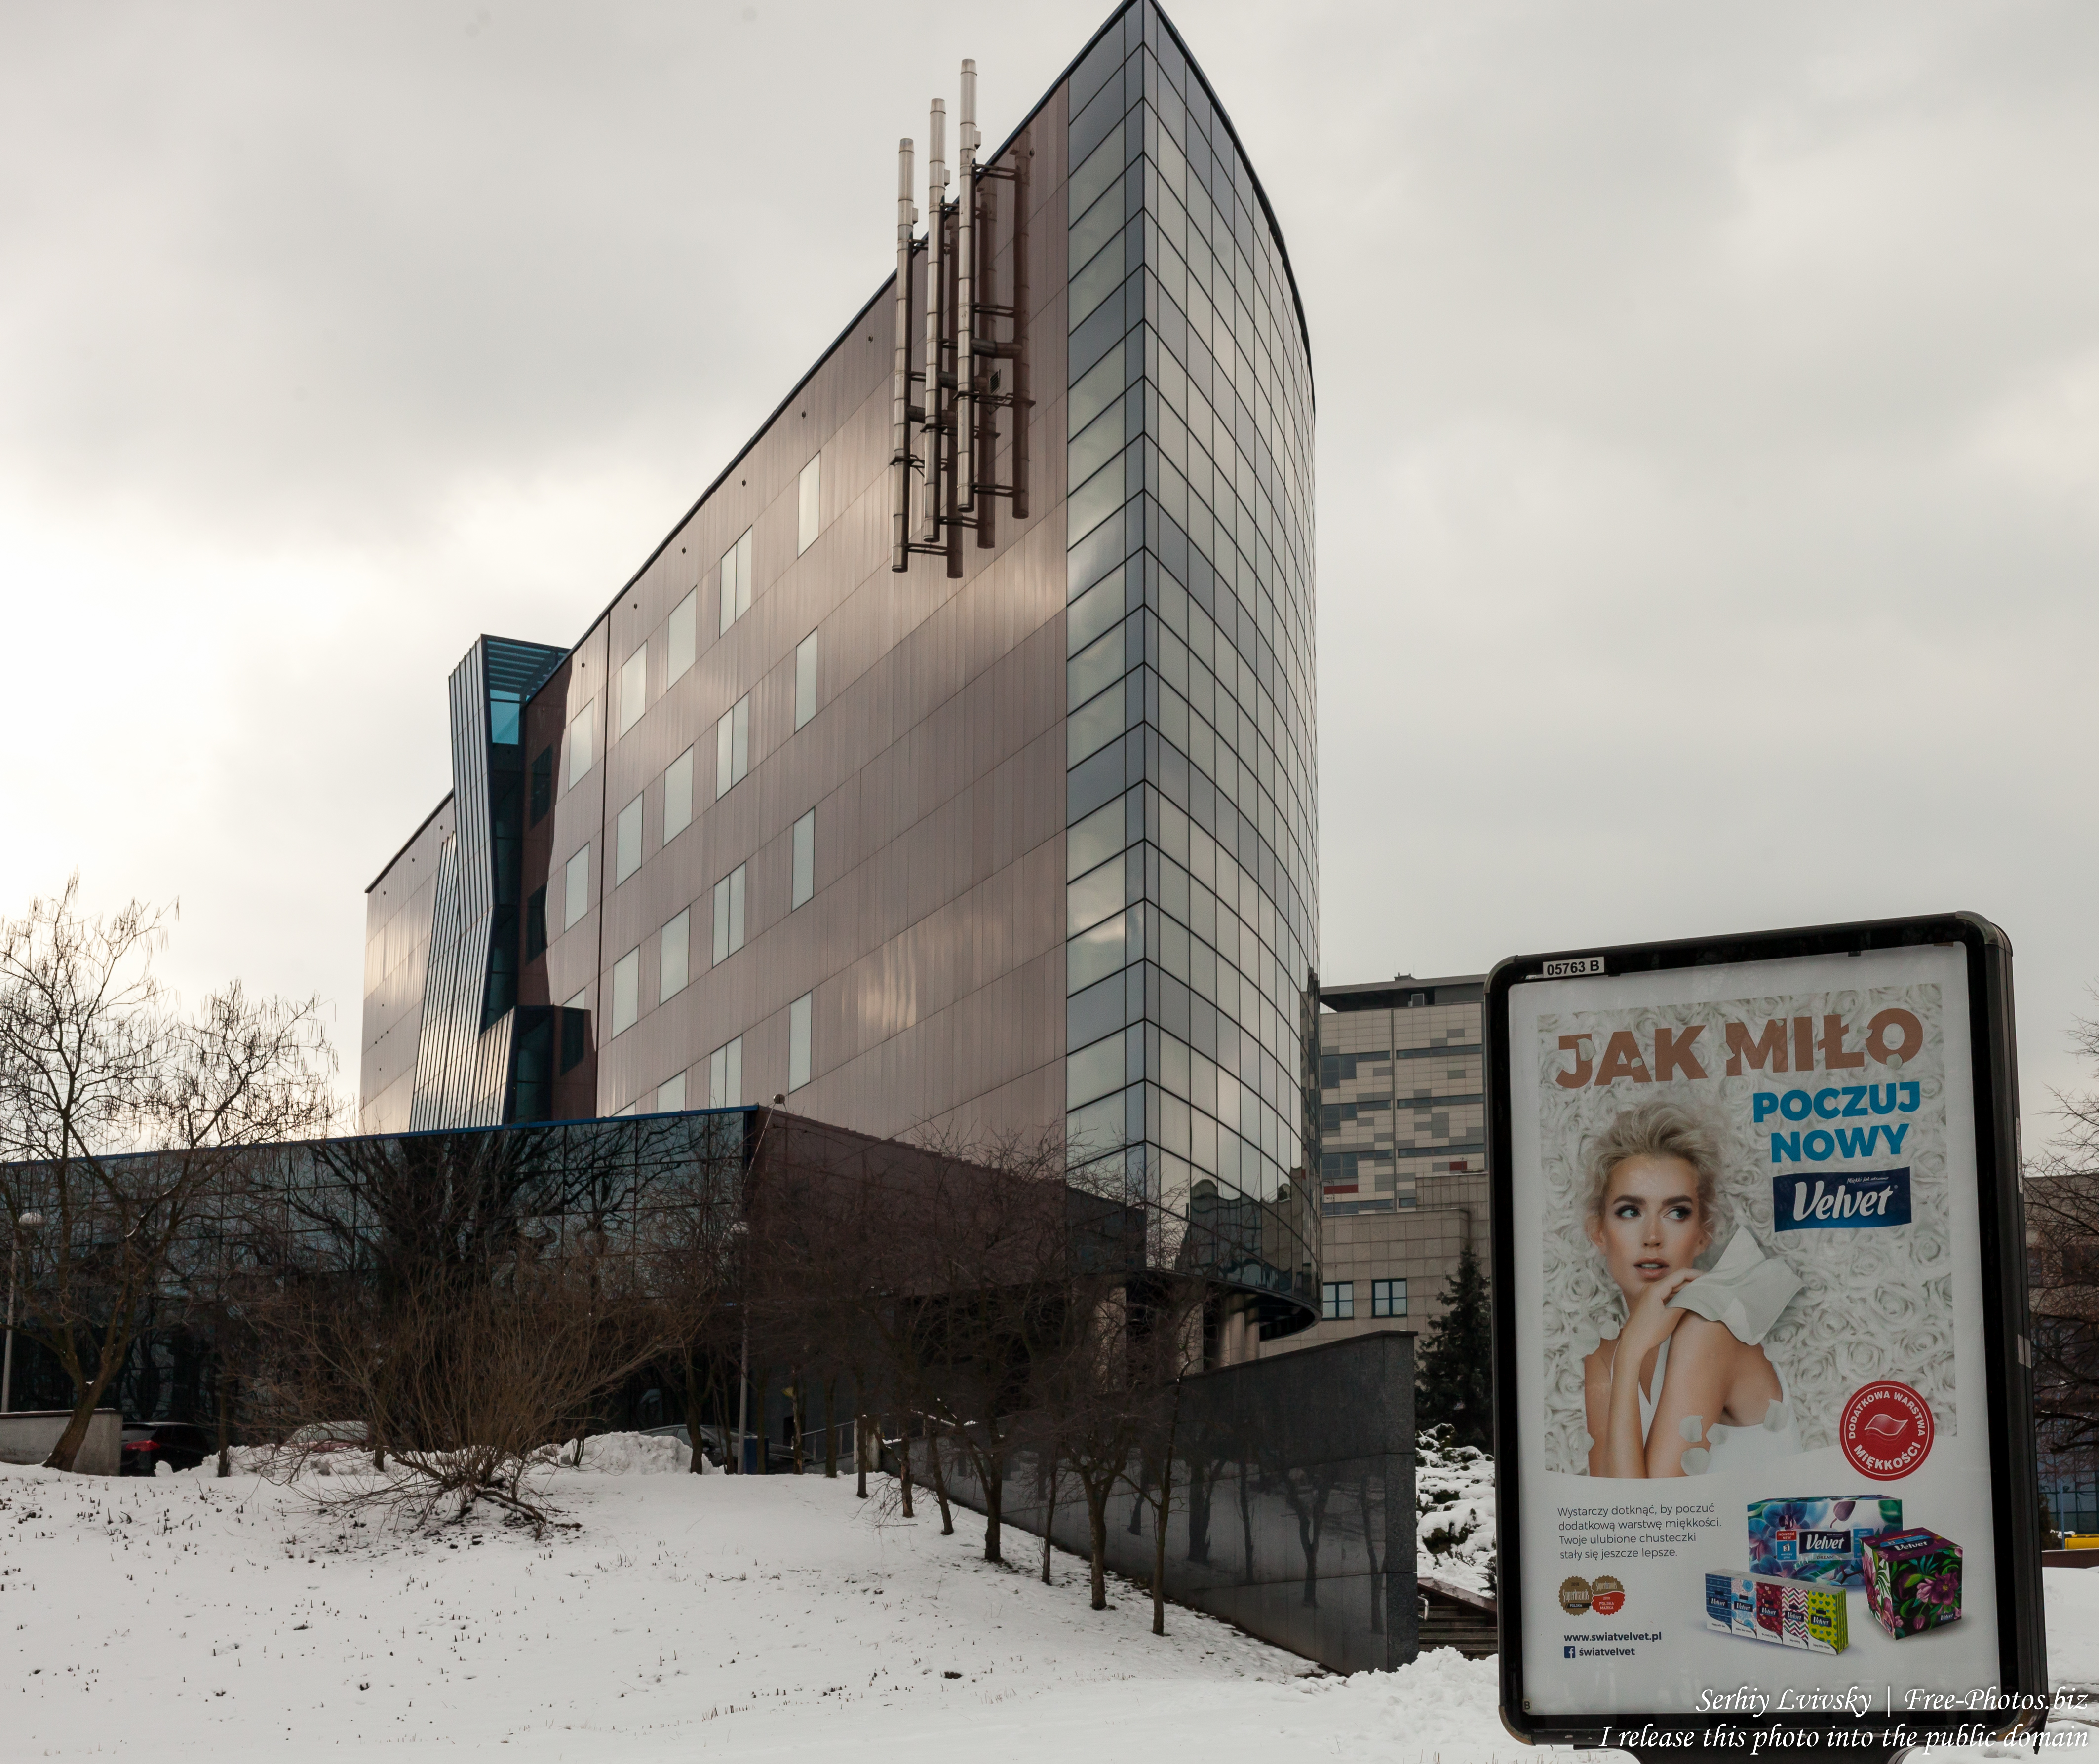 Katowice, Poland, photographed by Serhiy Lvivsky in February 2019, picture 2